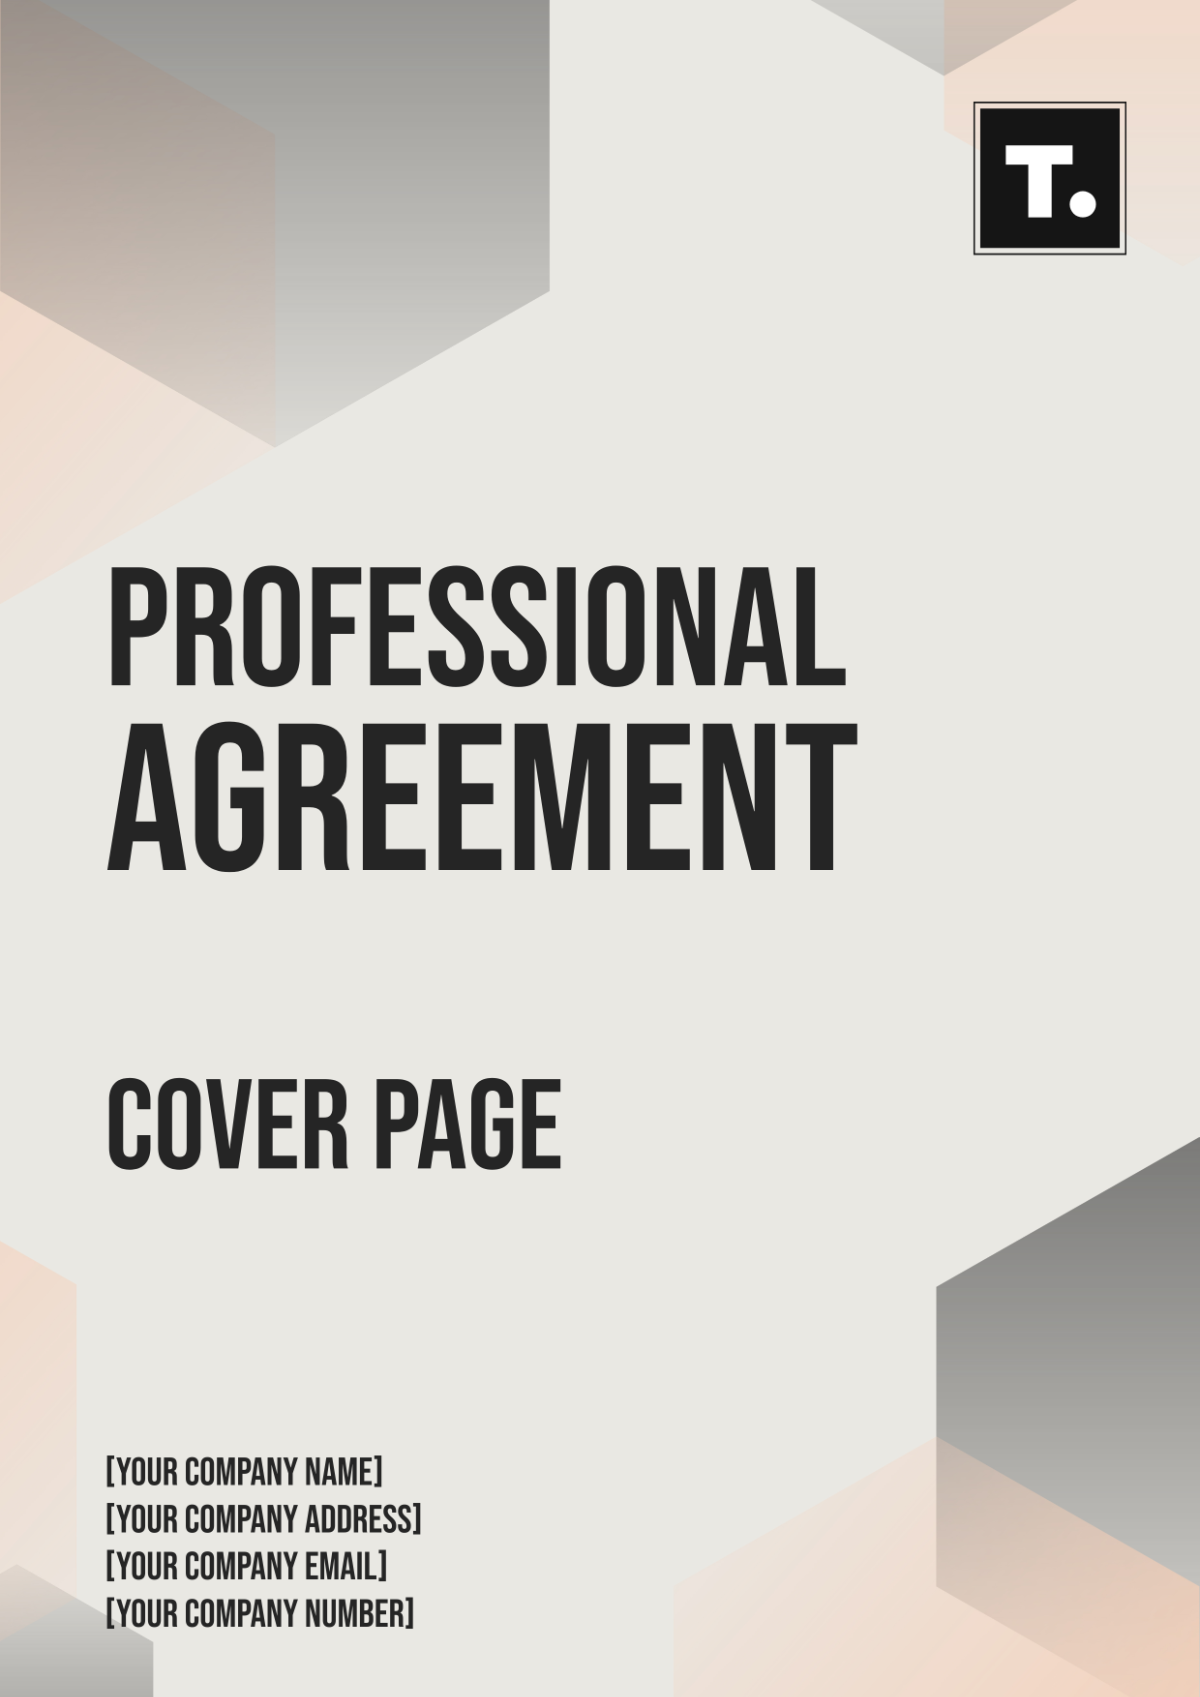 Professional Agreement Cover Page